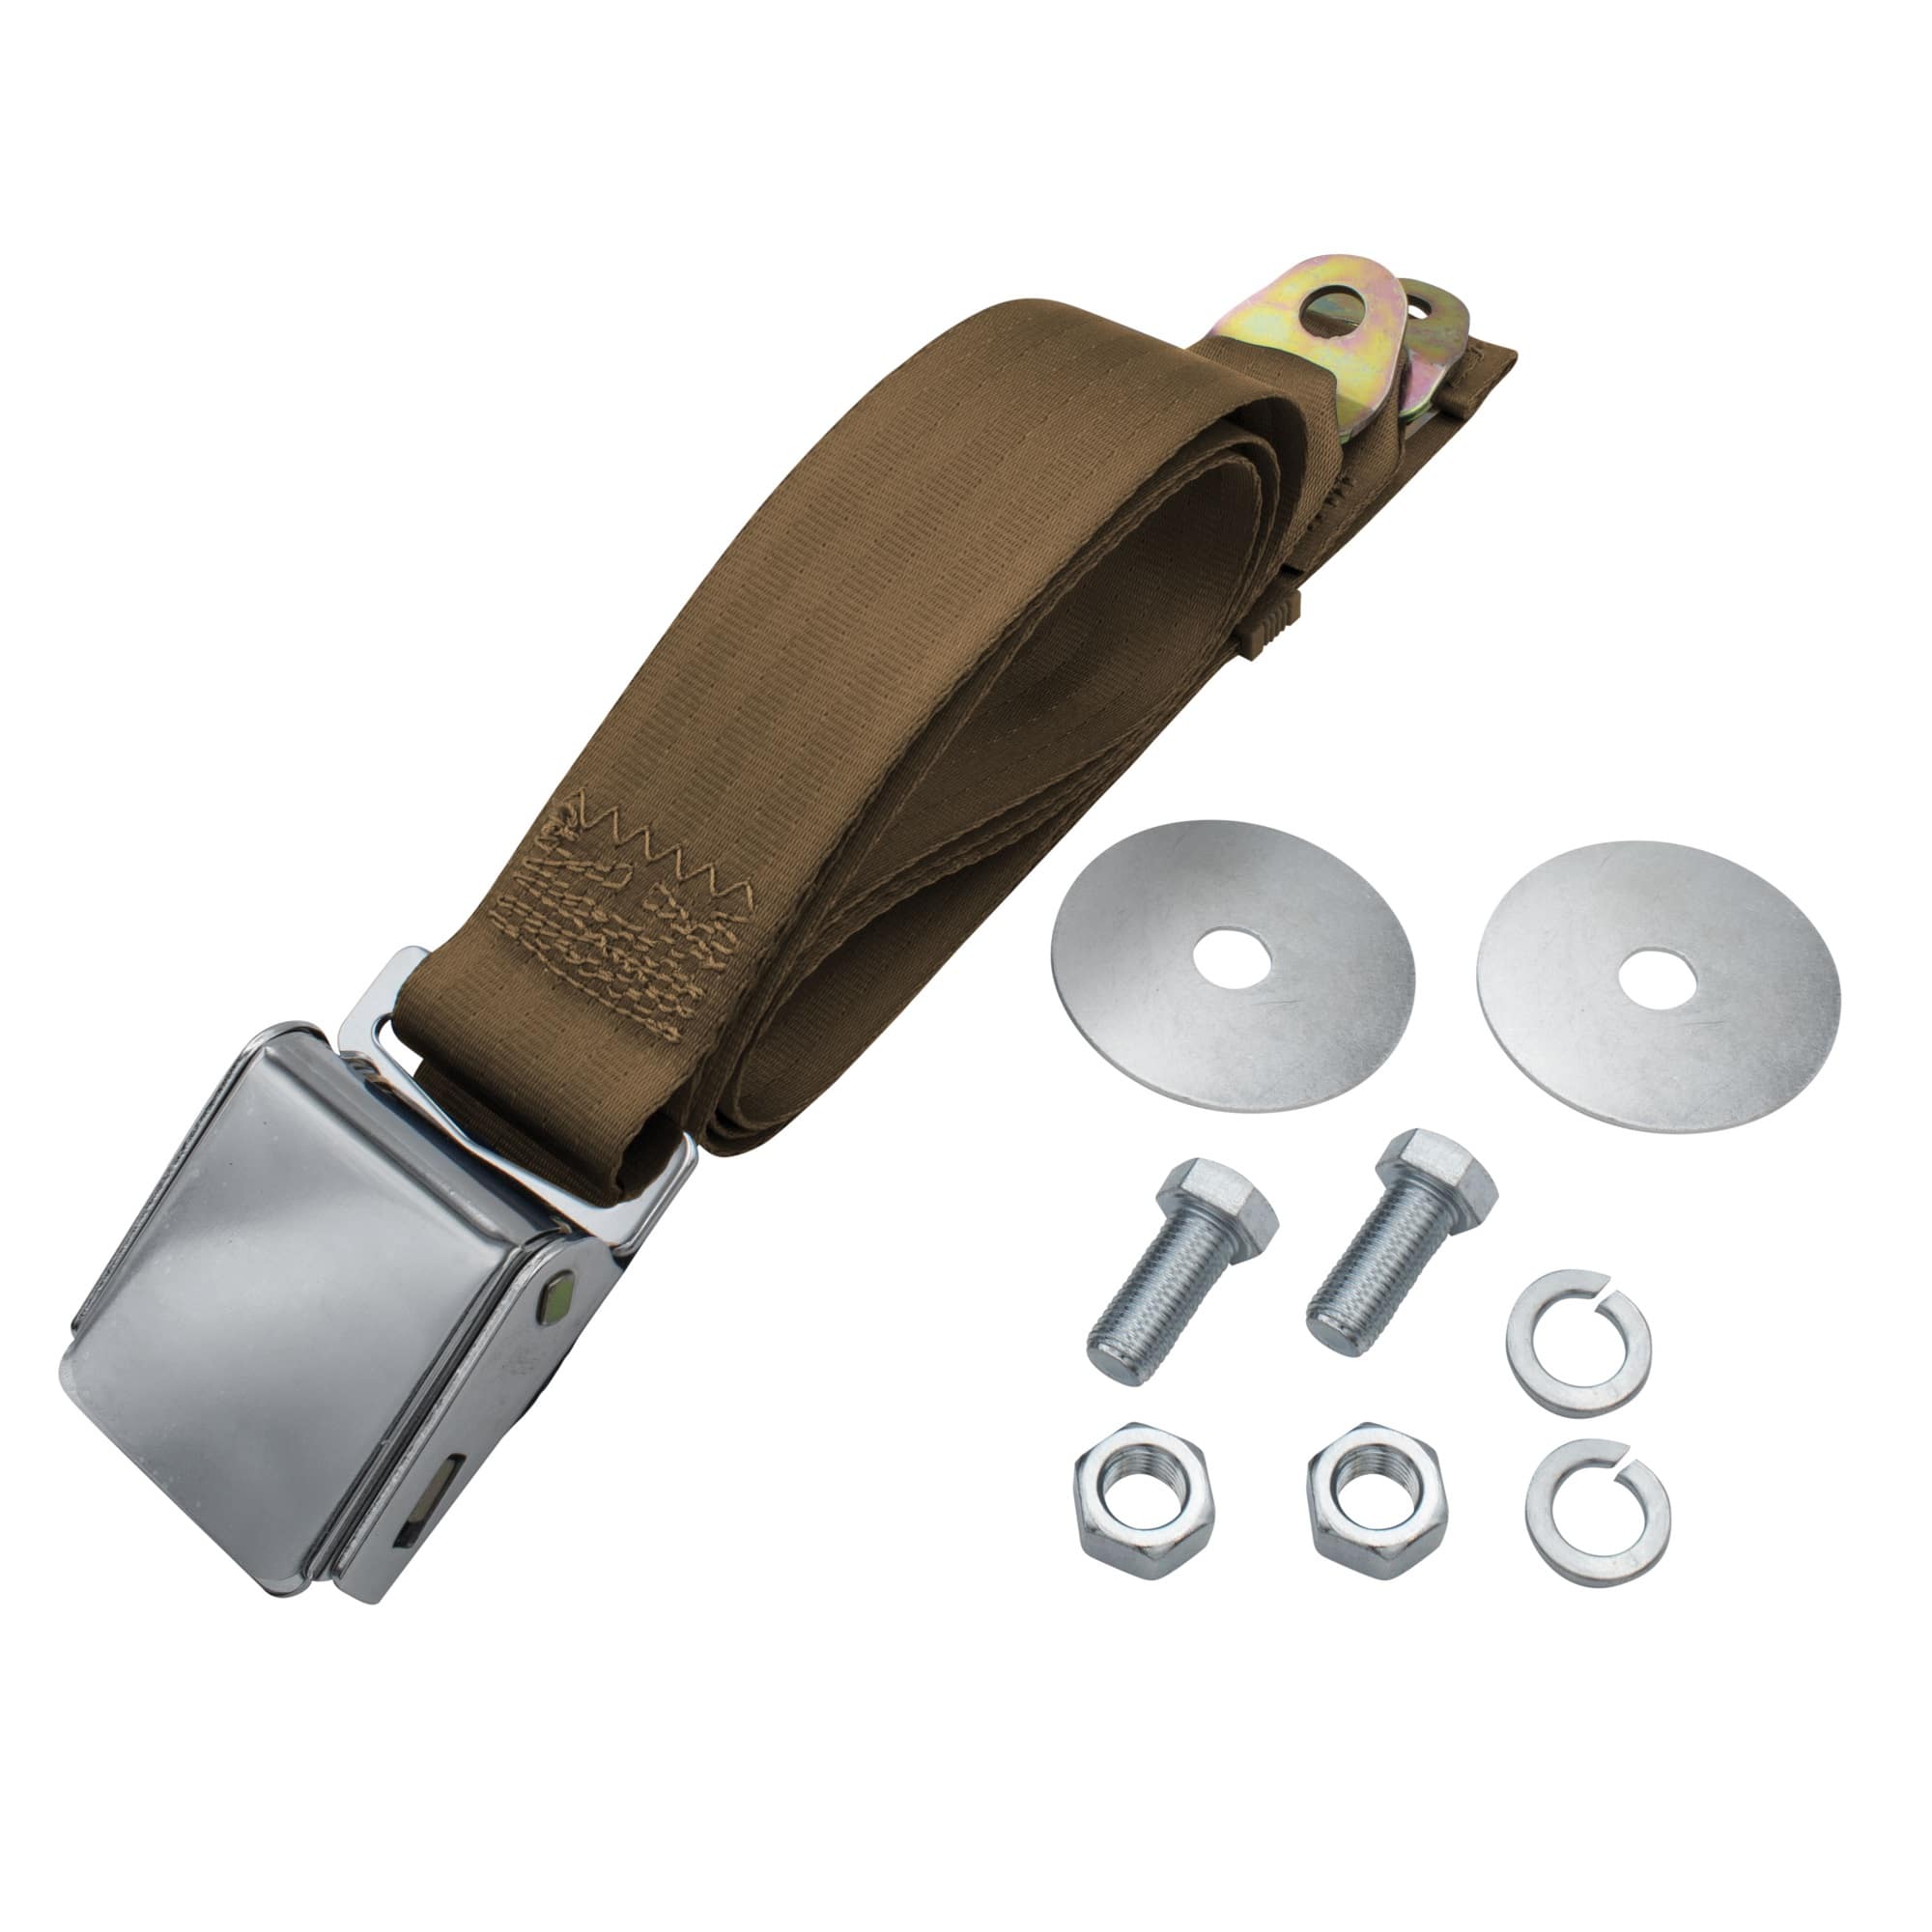 2 Point Lap Seat Belt With Chrome Latch Buckle w/ Hardware